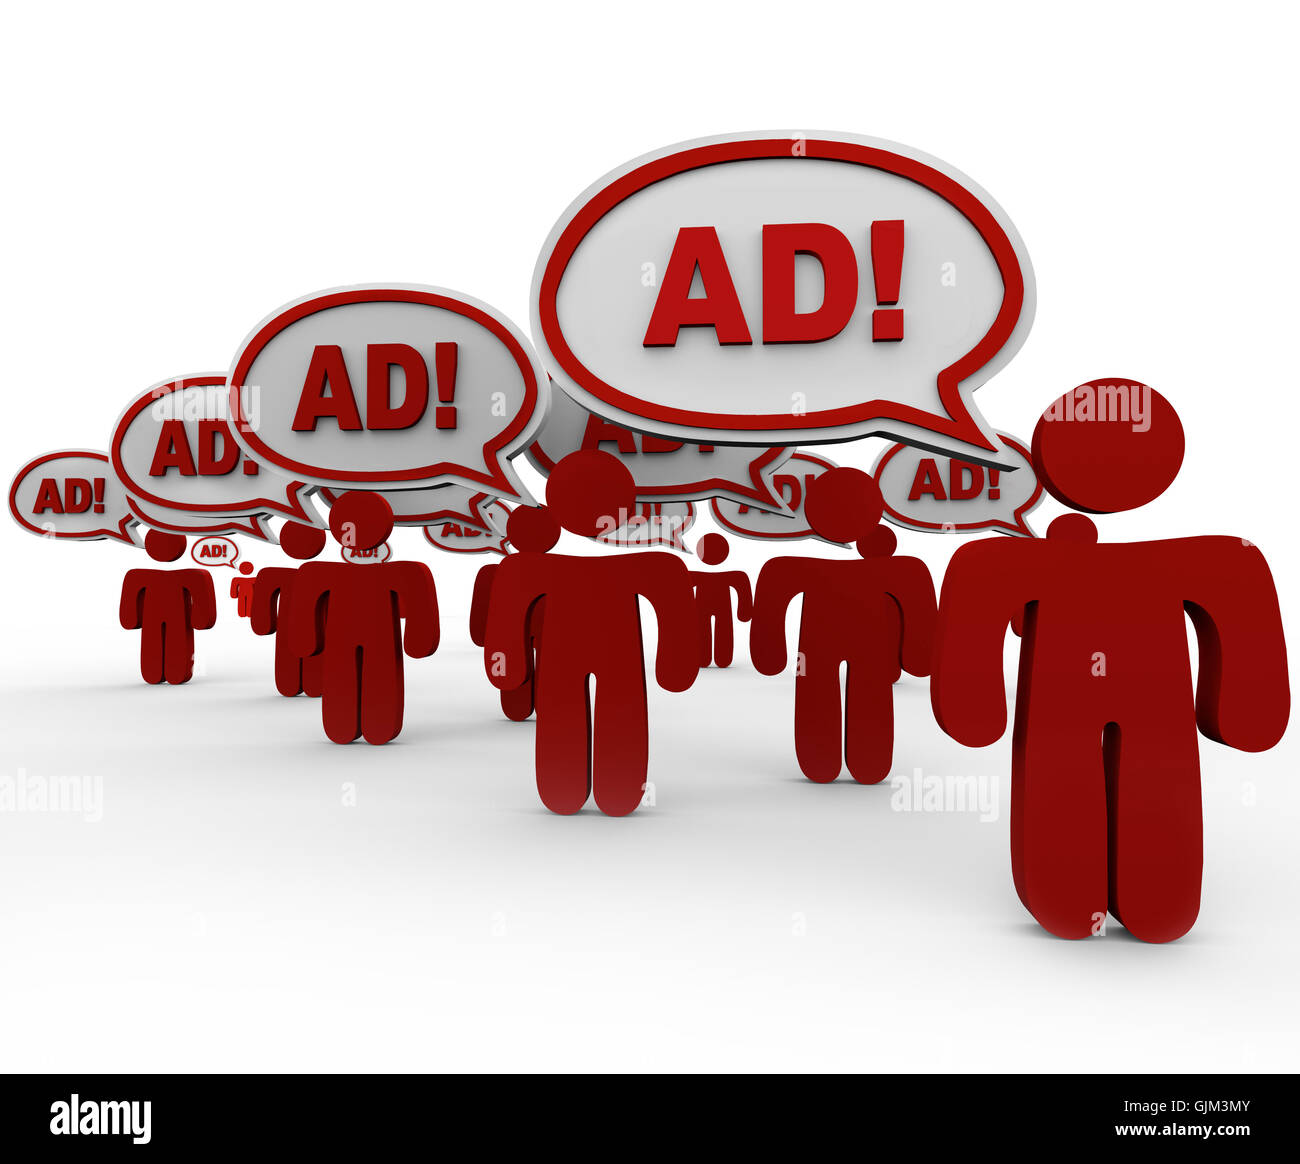 Advertising Overload - Many Sellers Say Ad in Speech Clouds Stock Photo